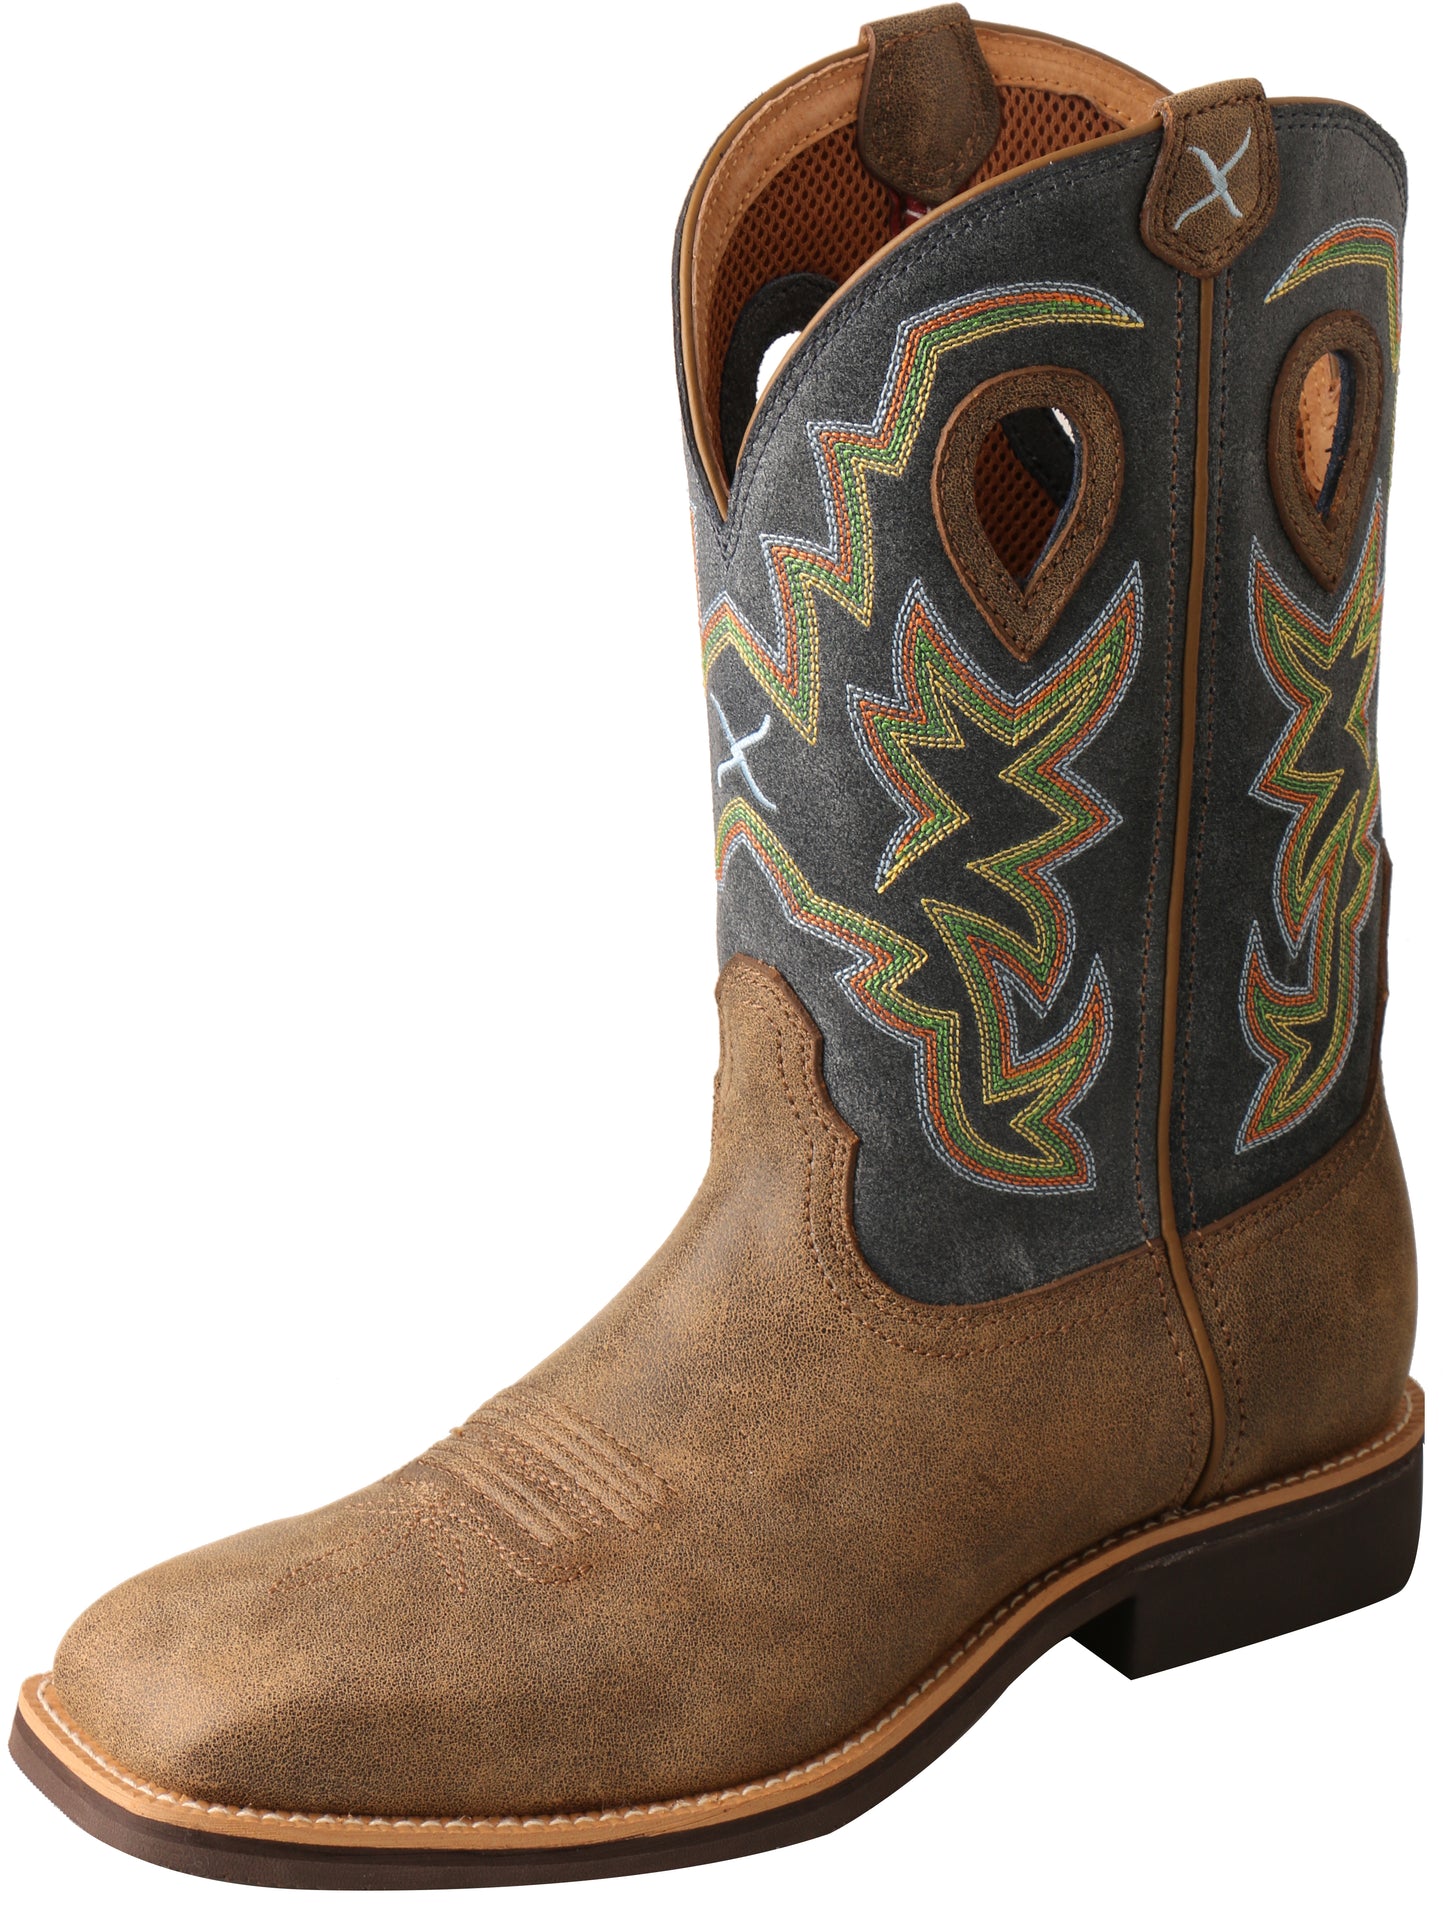 Twisted X Mens Navy Top Hand Boot - TCMTH0001- ON SALE